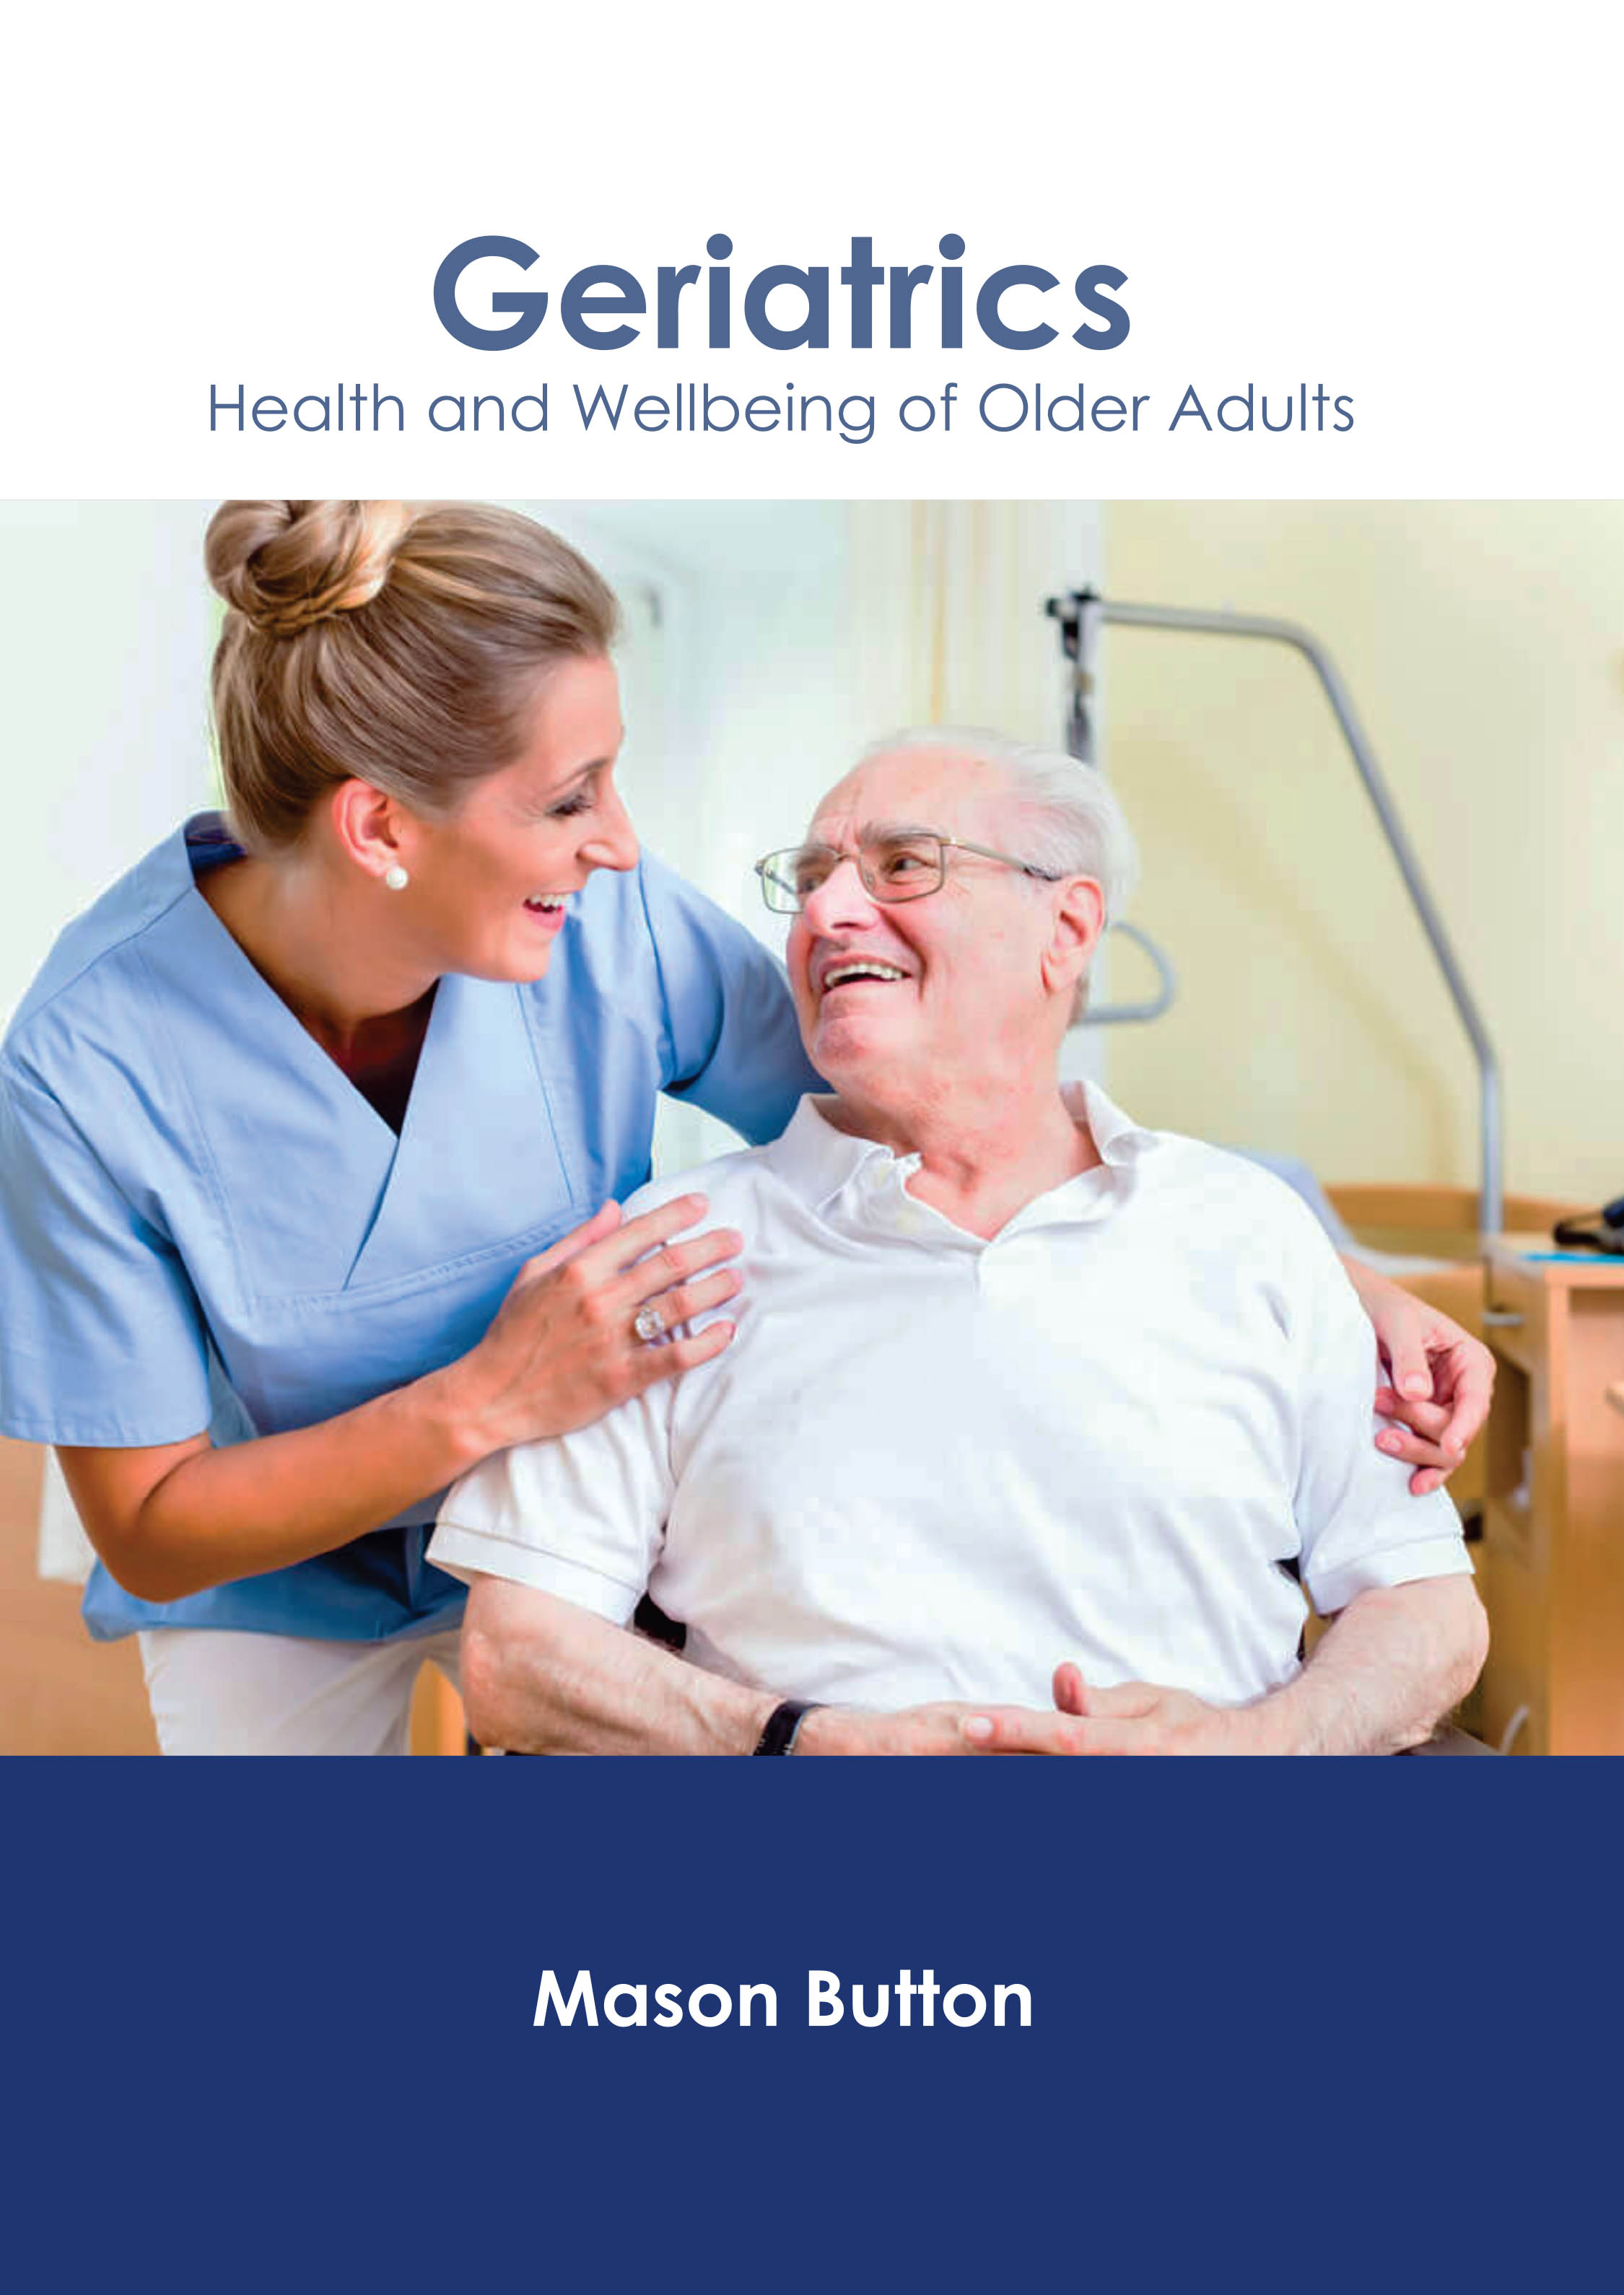 

exclusive-publishers/american-medical-publishers/geriatrics-health-and-wellbeing-of-older-adults-9781639270057